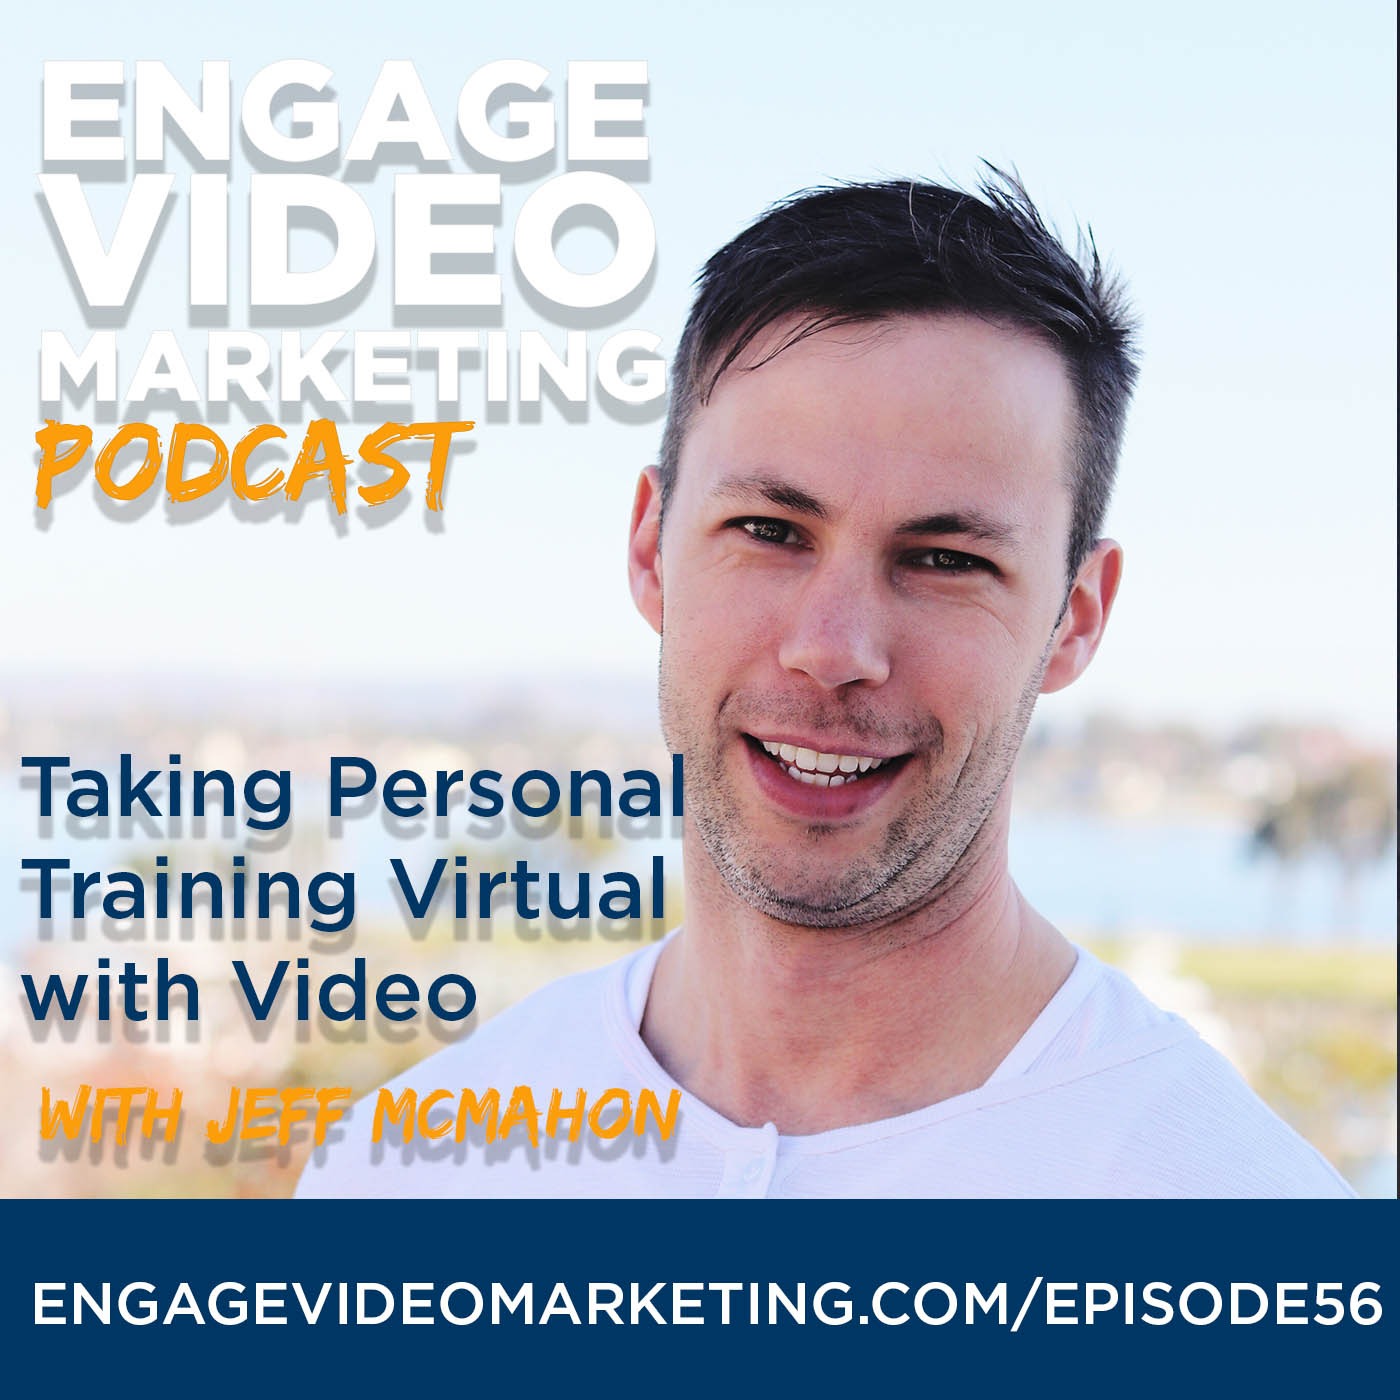 Taking Personal Training Virtual with Video with Jeff McMahon